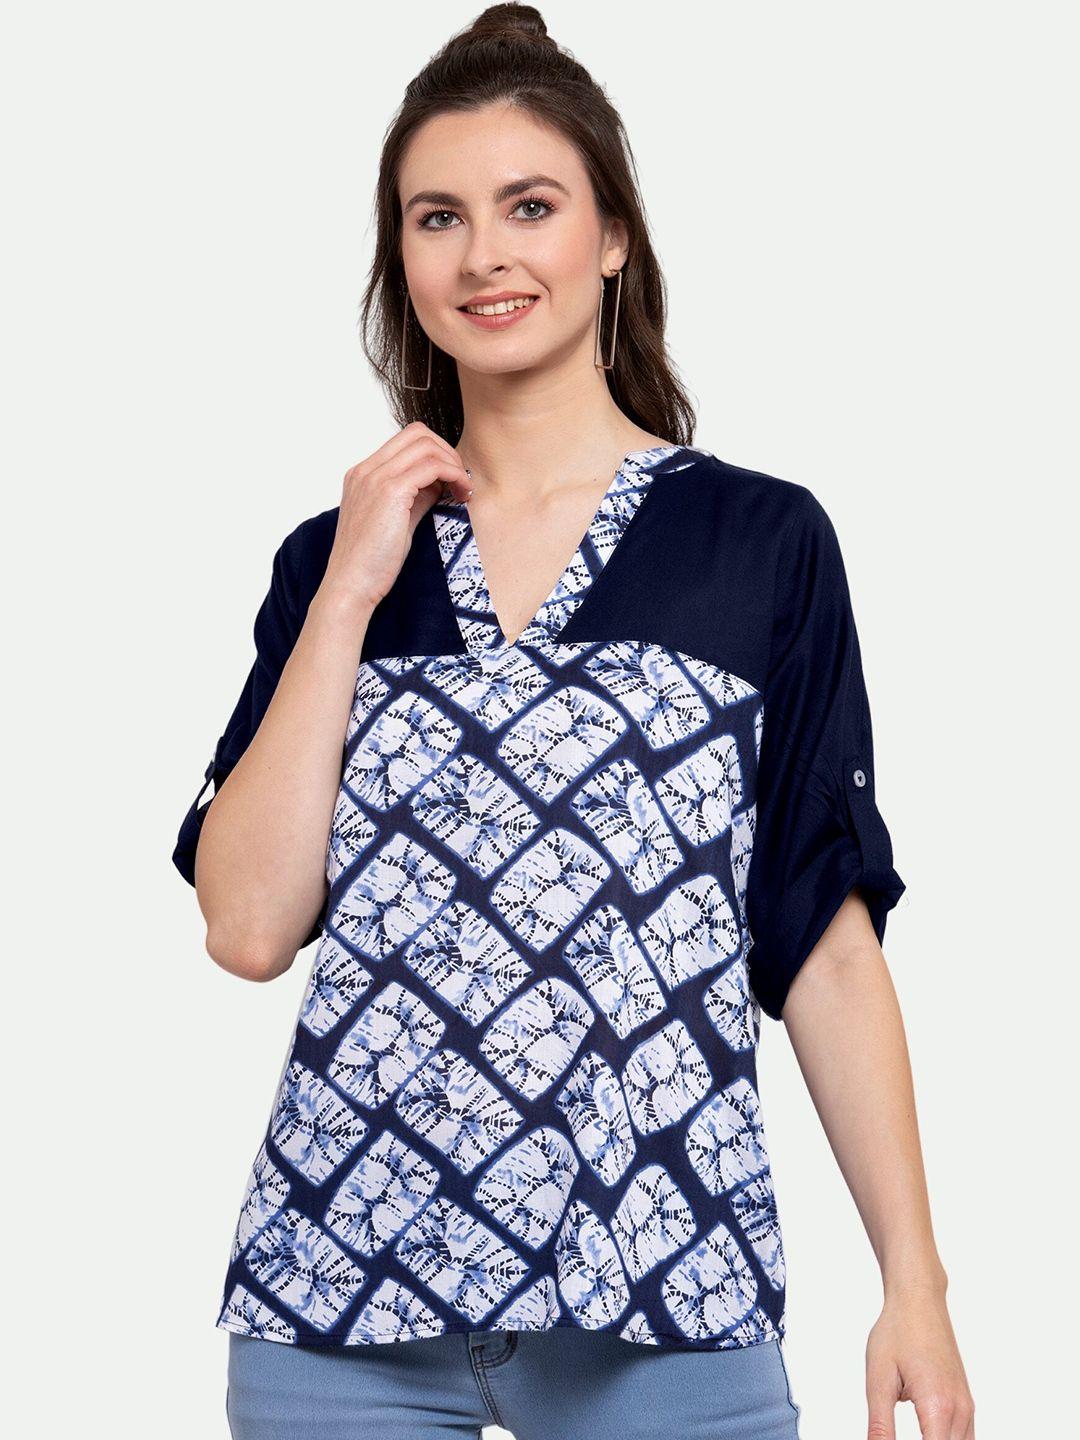 patrorna women navy blue & white printed roll-up sleeves shirt style top